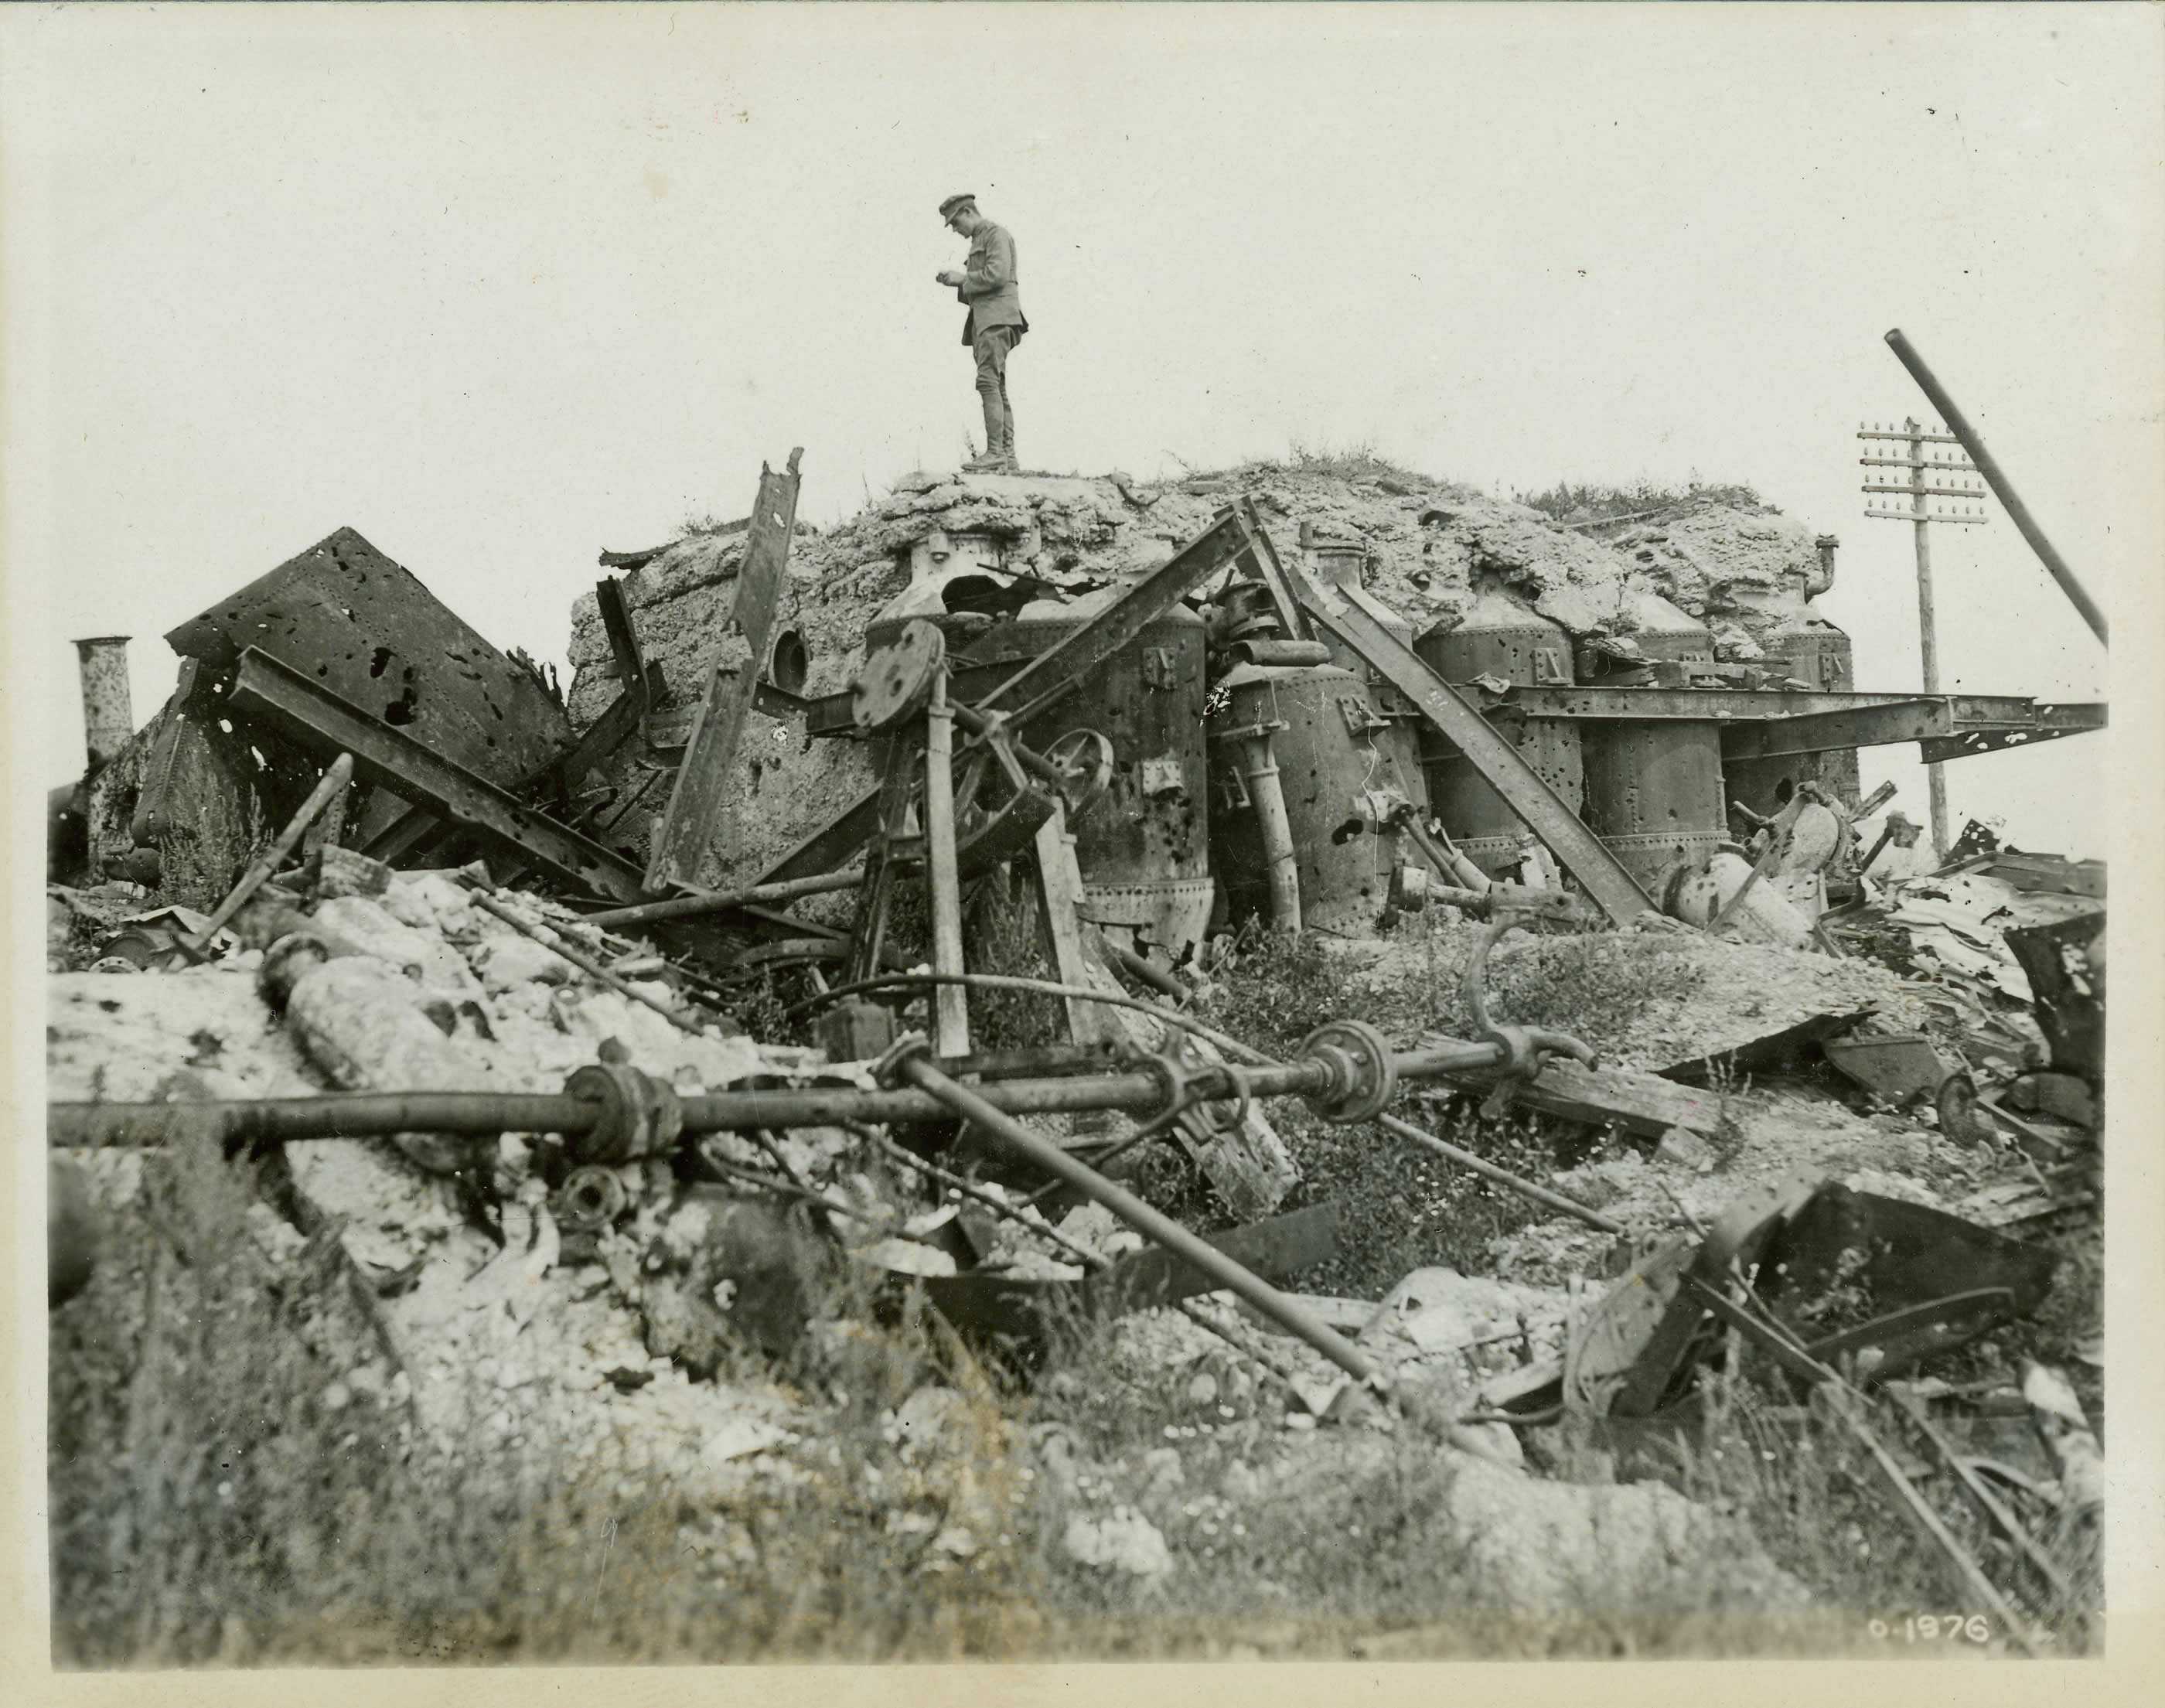 Black and white photograph. A lone soldier stands on the ruins of a sugar factory. Various mechanical implements are visible in the rubble.